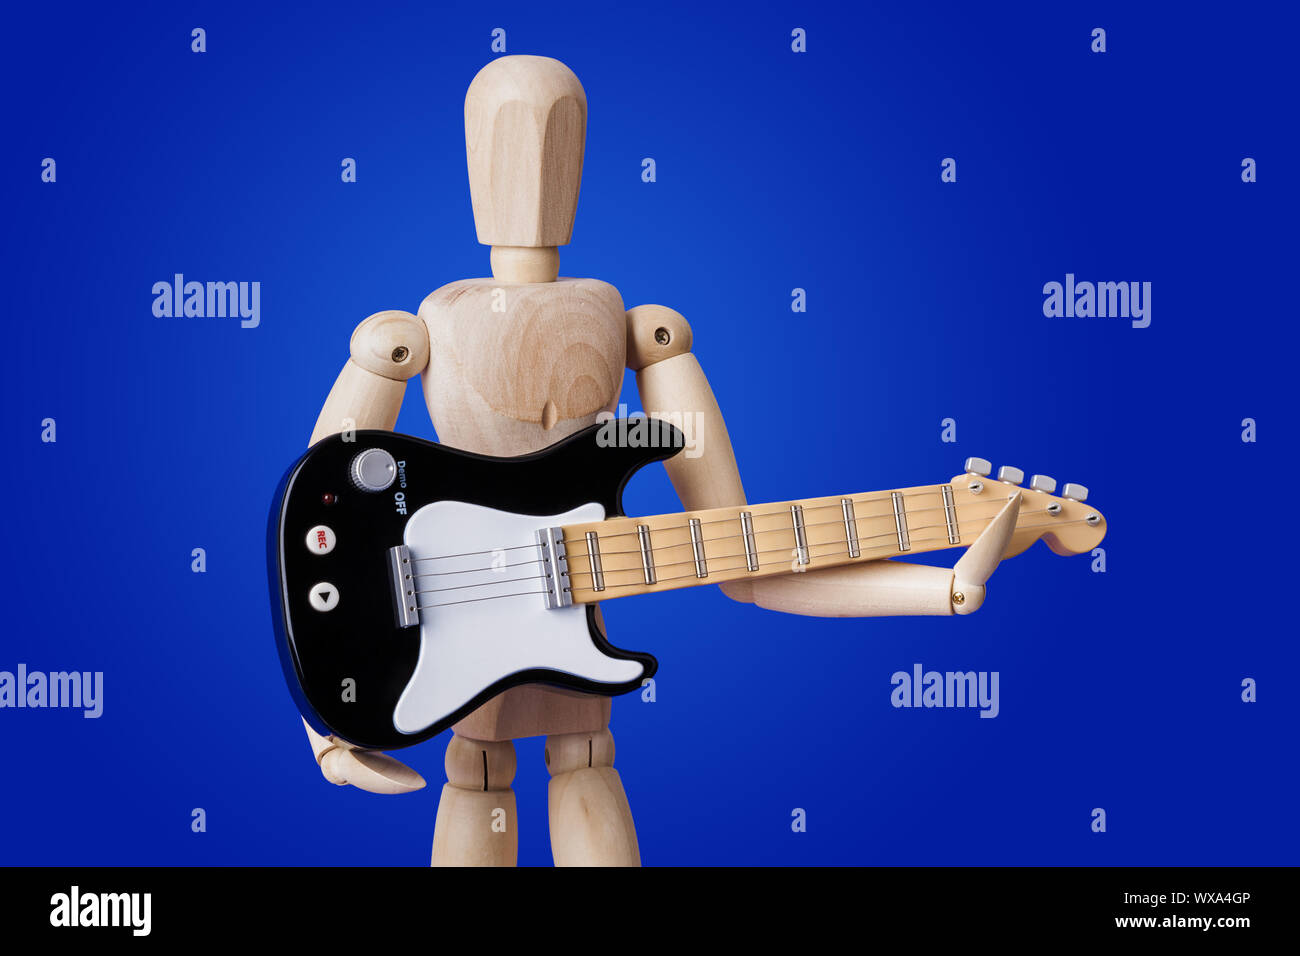 Wooden toy figure with electric guitar on blue Stock Photo